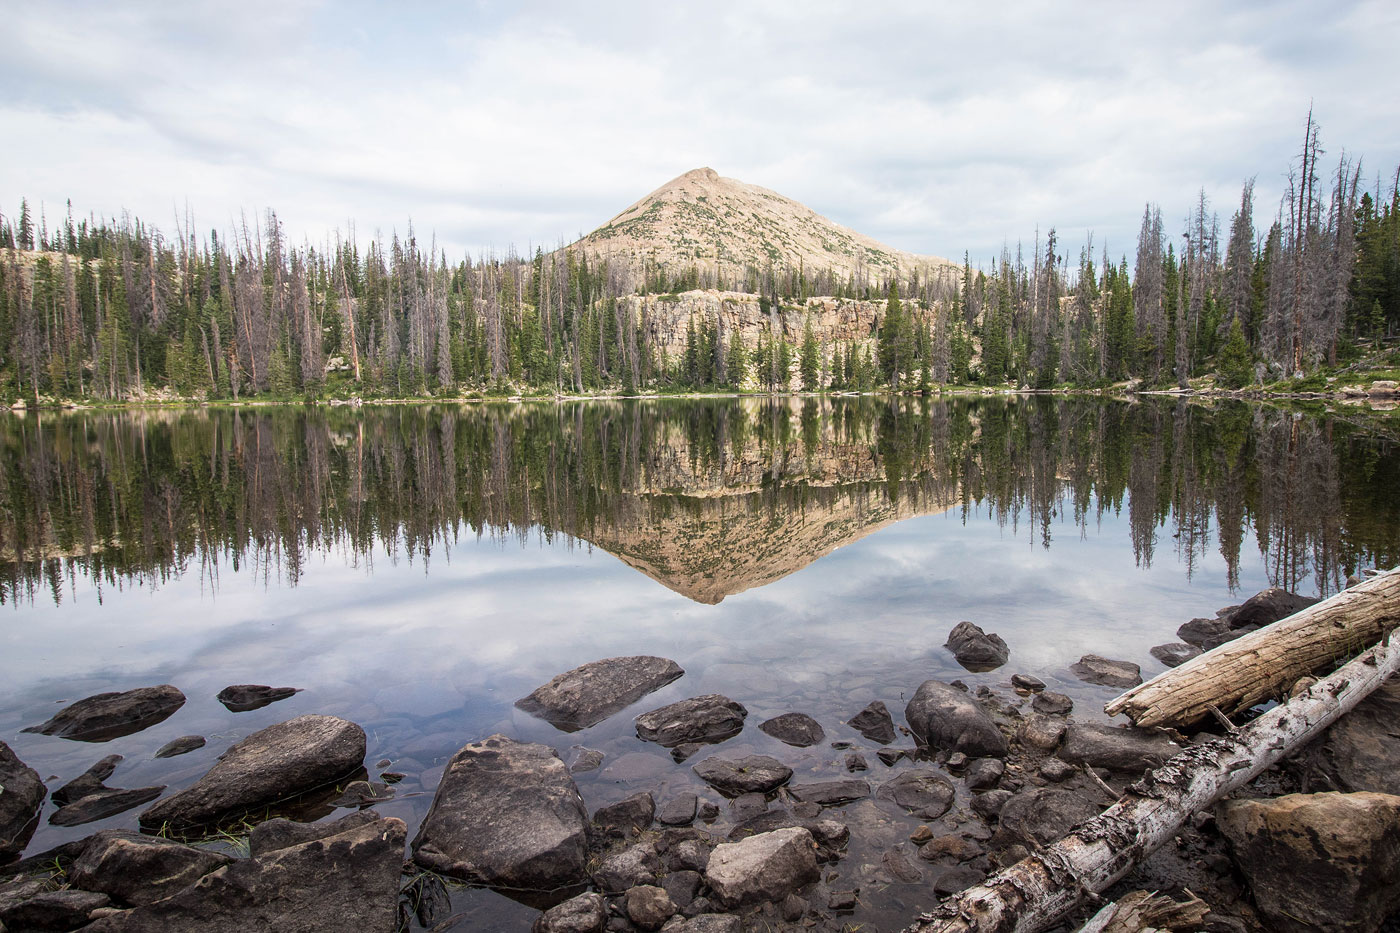 Hike Mount Watson and Notch Mountain via Three Divide Lakes Loop in Uinta-Wasatch-Cache National Forest, Utah - Stav is Lost